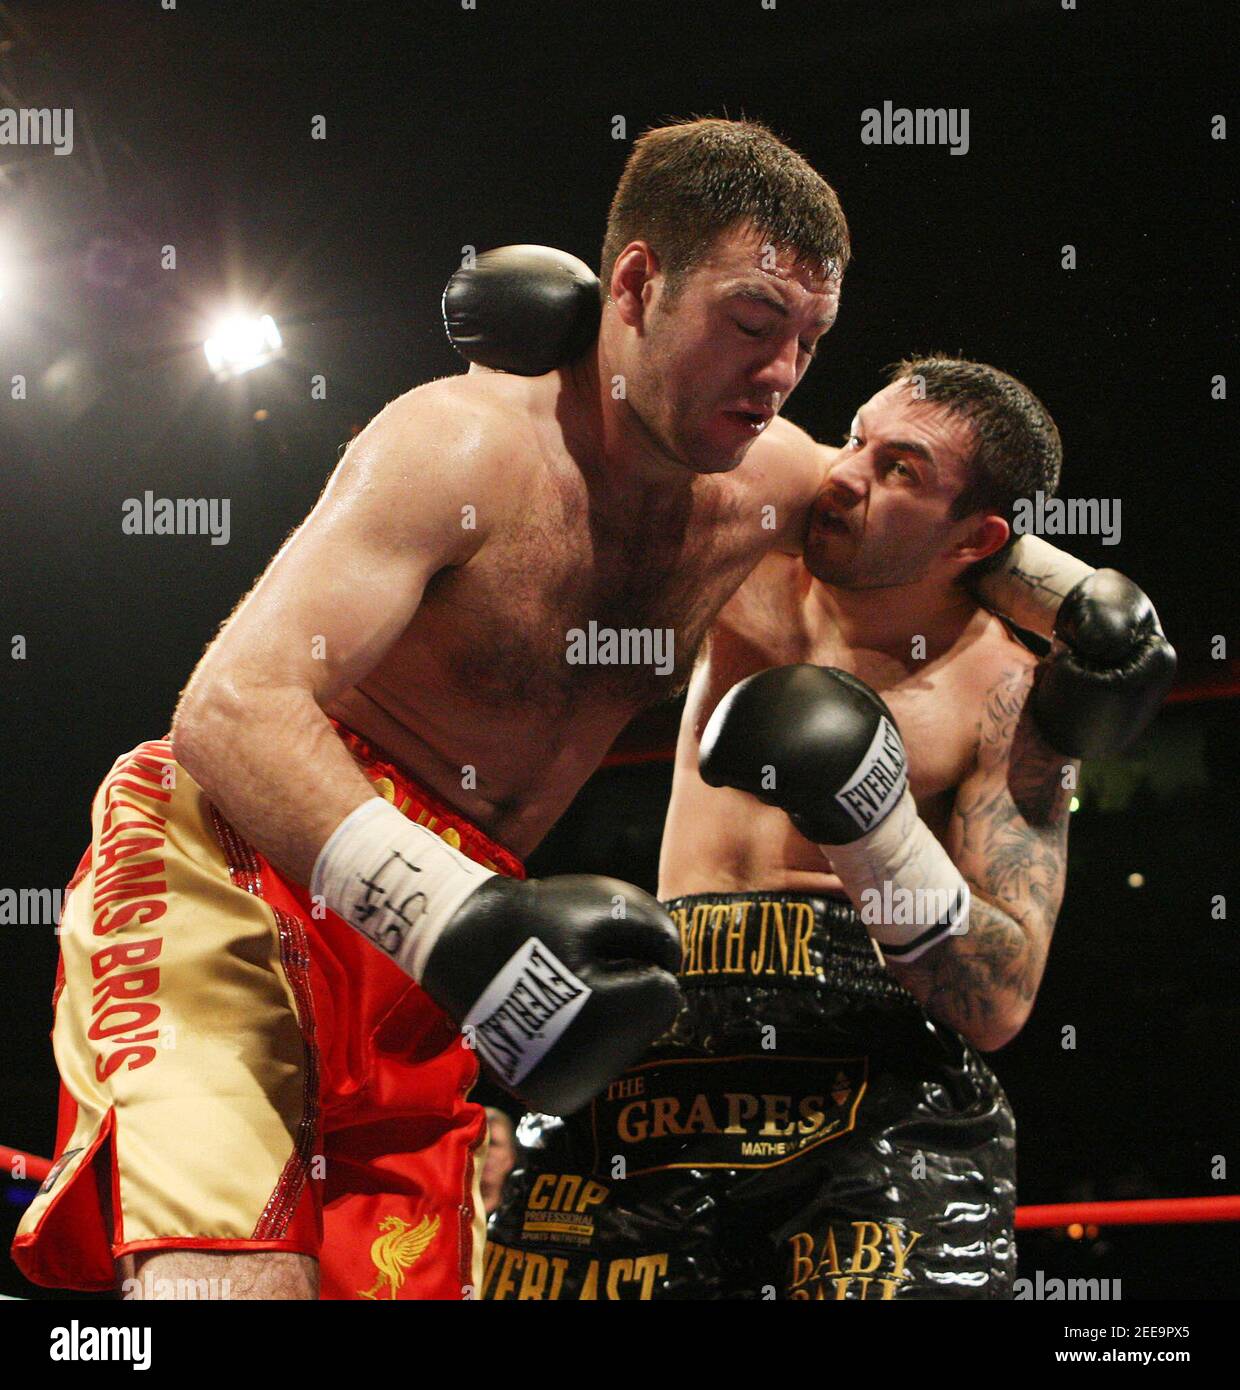 Boxing - Paul Smith v Tony Quigley British Super-Middleweight Title - Liverpool  Echo Arena - 30/10/09 Paul Smith in action against Tony Quigley (L)  Mandatory Credit: Action Images / Carl Recine Livepic Stock Photo - Alamy